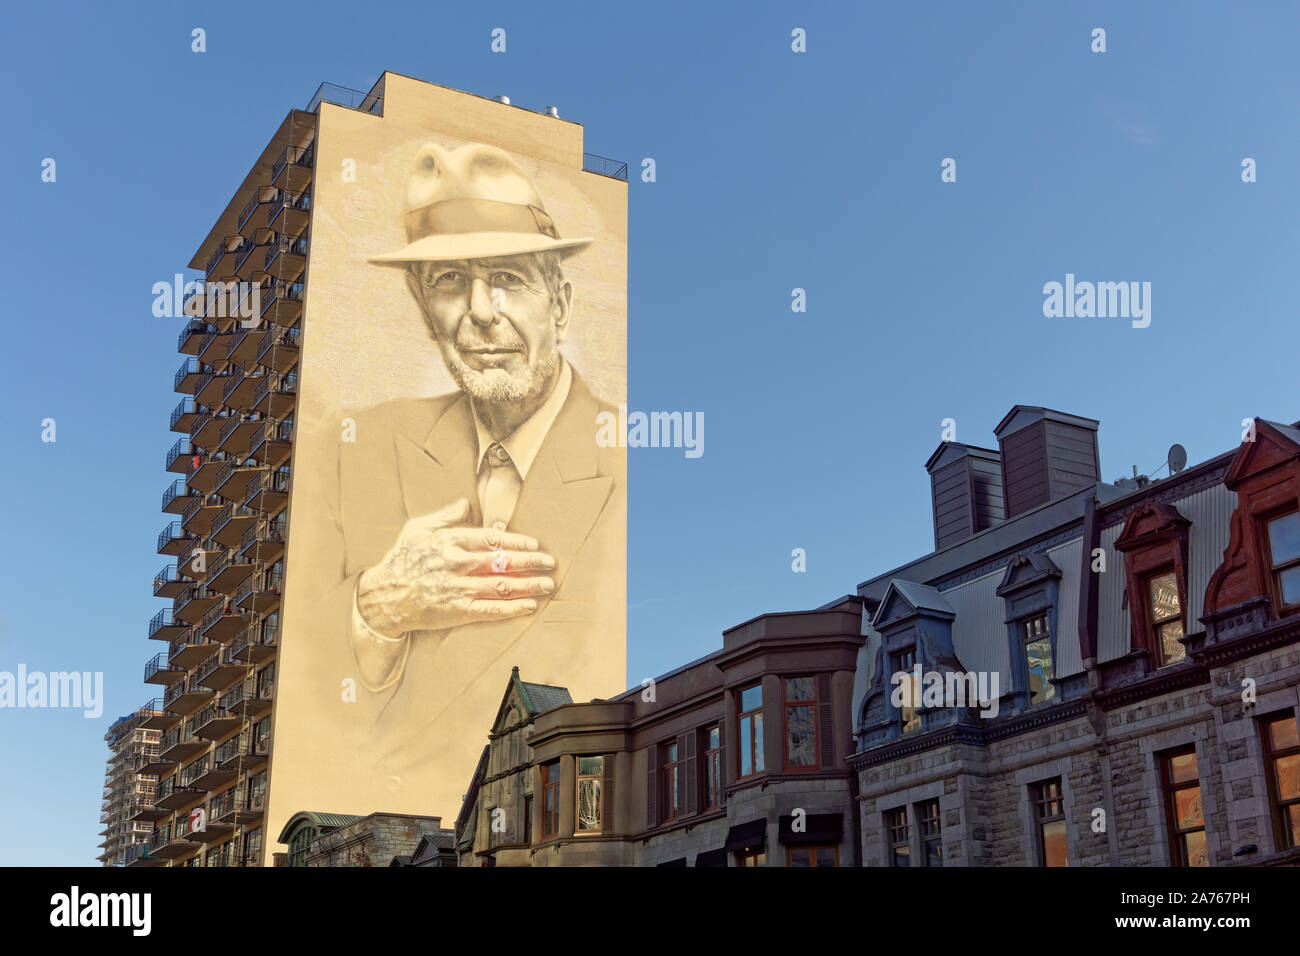 Huge Leonard Cohen mural painted on the side of a tall building on Crescent Street in downtown Montreal, Quebec, Canada Stock Photo